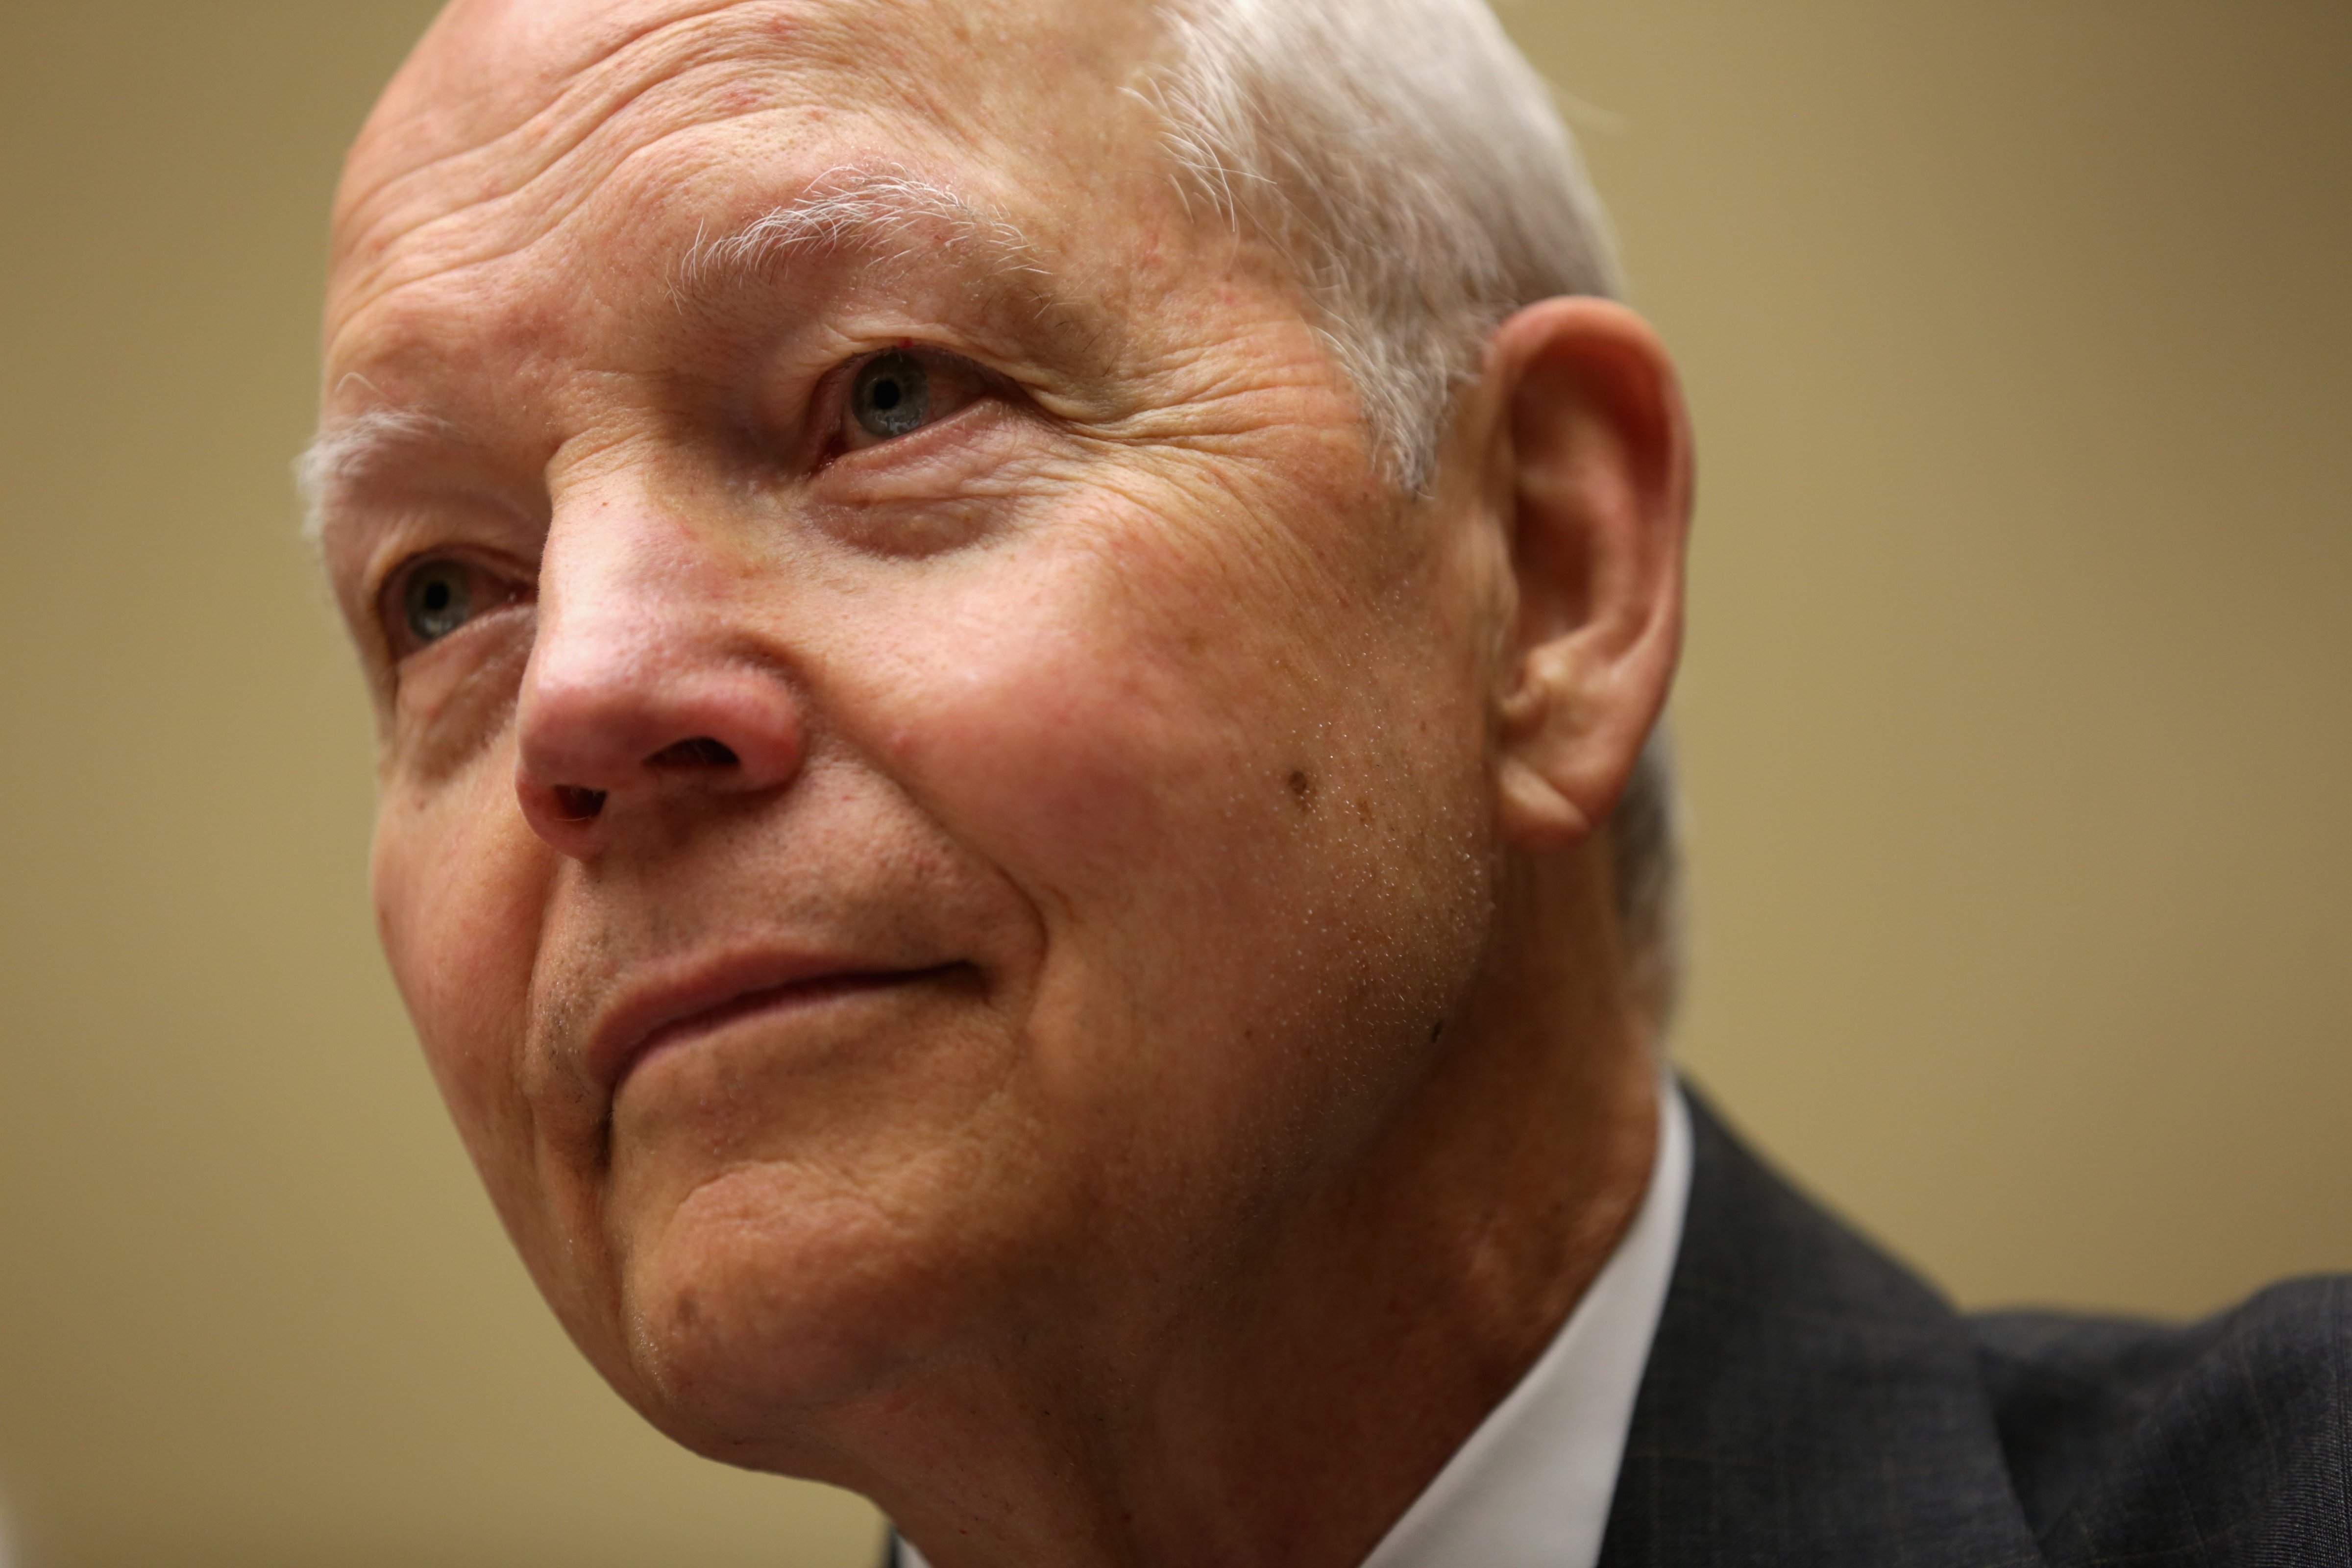 Internal Revenue Service Commissioner John Koskinen testifies during a hearing before the Government Operations Subcommittee of the House Oversight and Government Reform Committee July 9, 2014 on Capitol Hill in Washington, D.C.